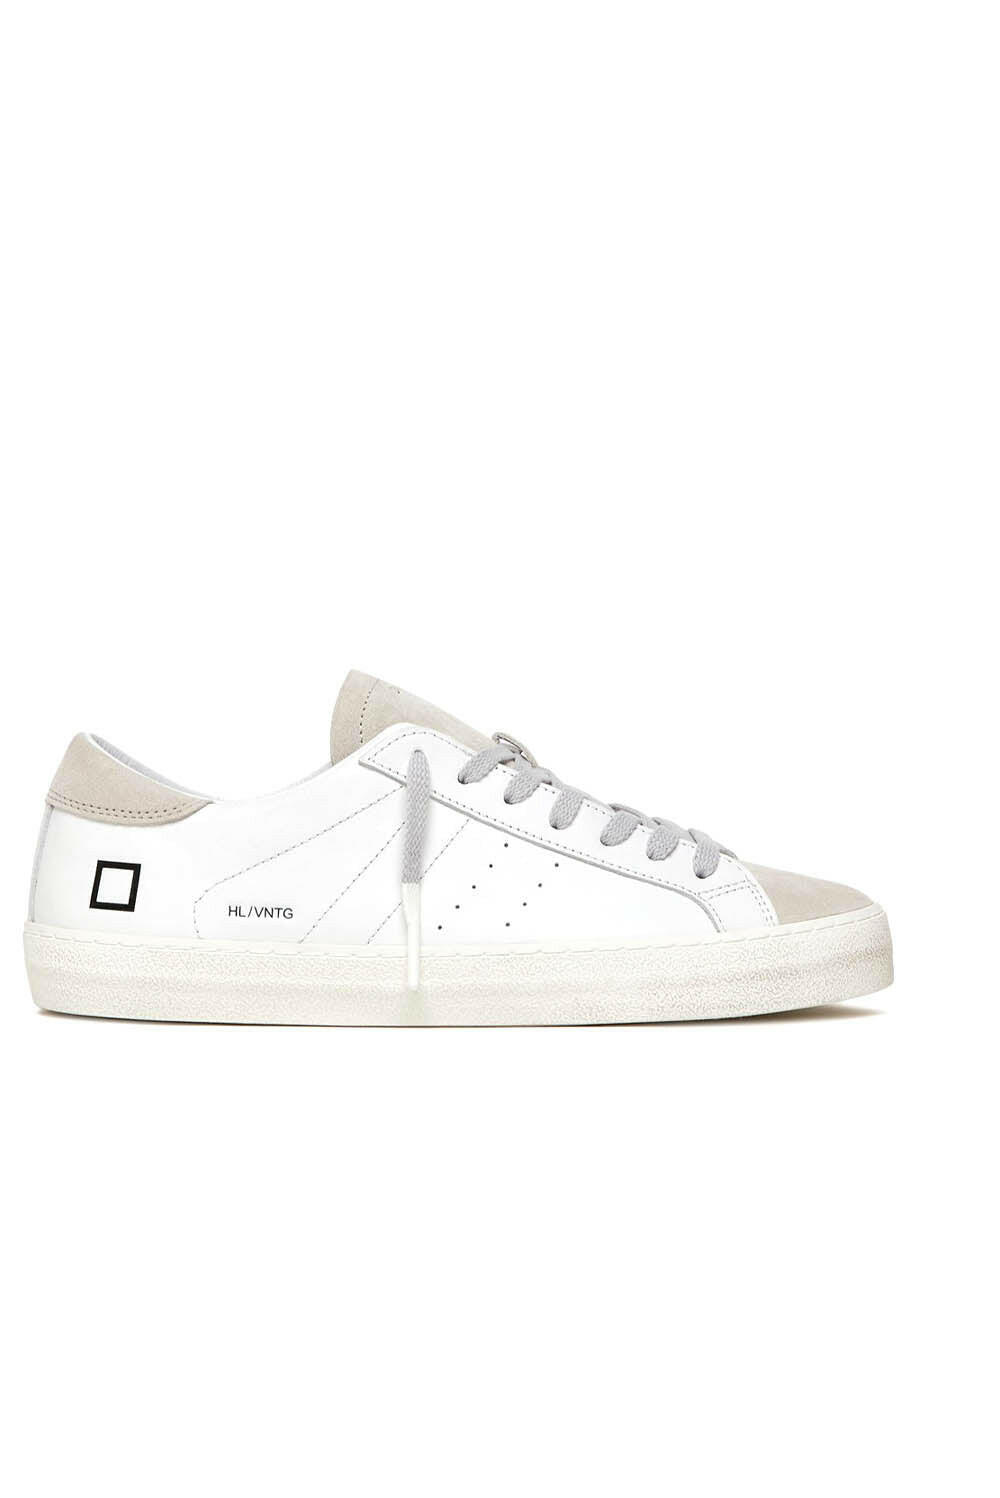  Date Sneakers Hill Low Uomo - 1